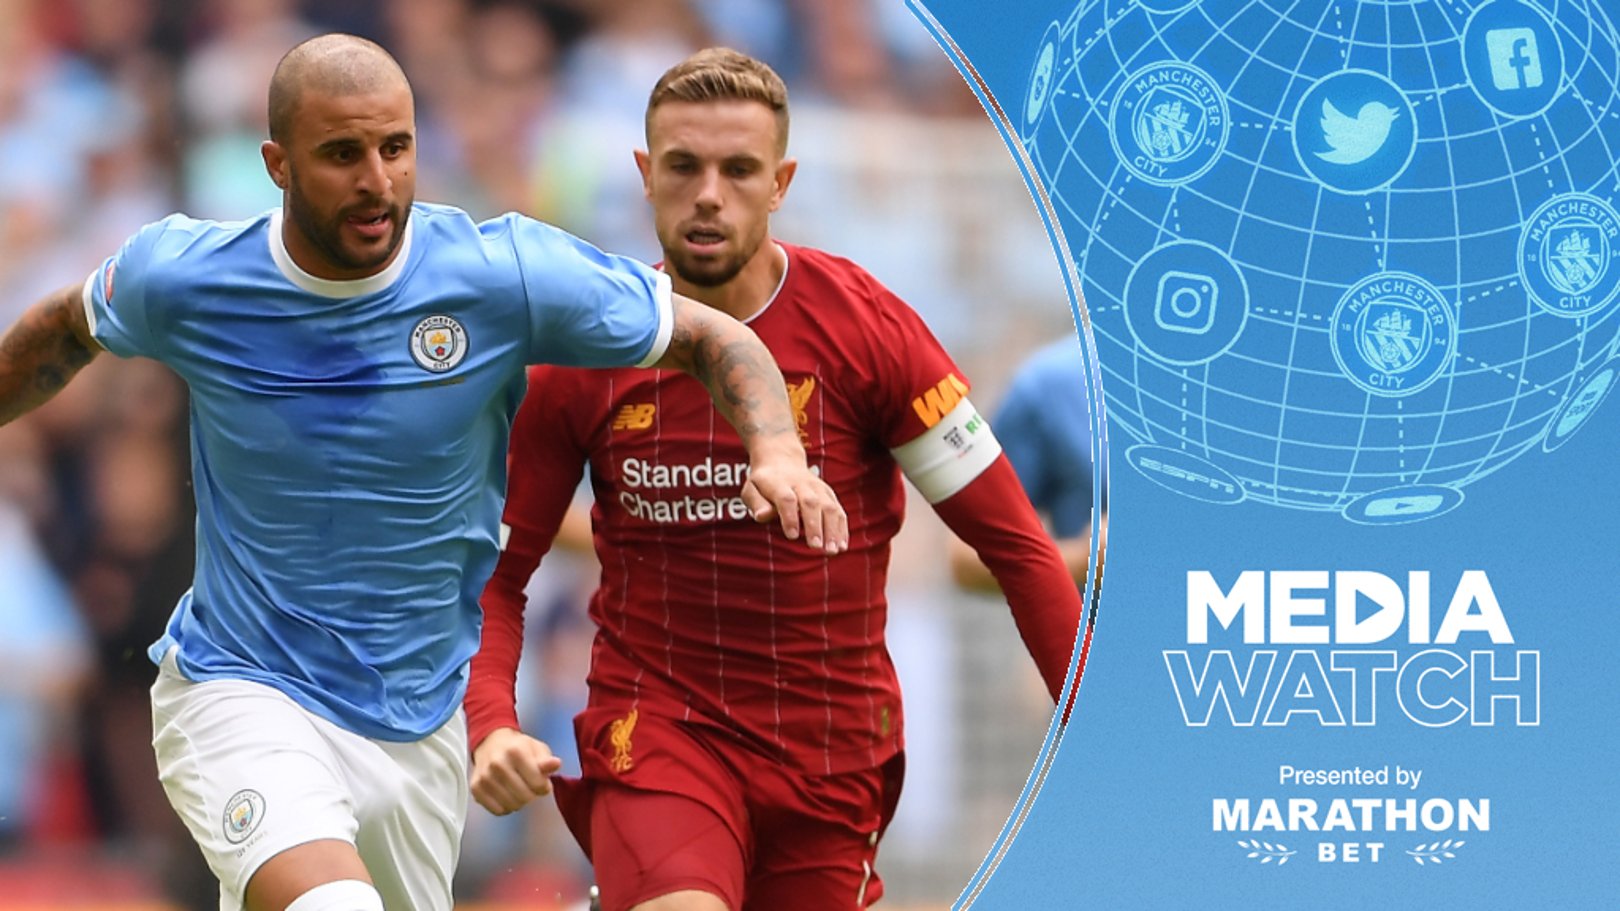 Media Watch: Liverpool v City ‘a gripping chapter’